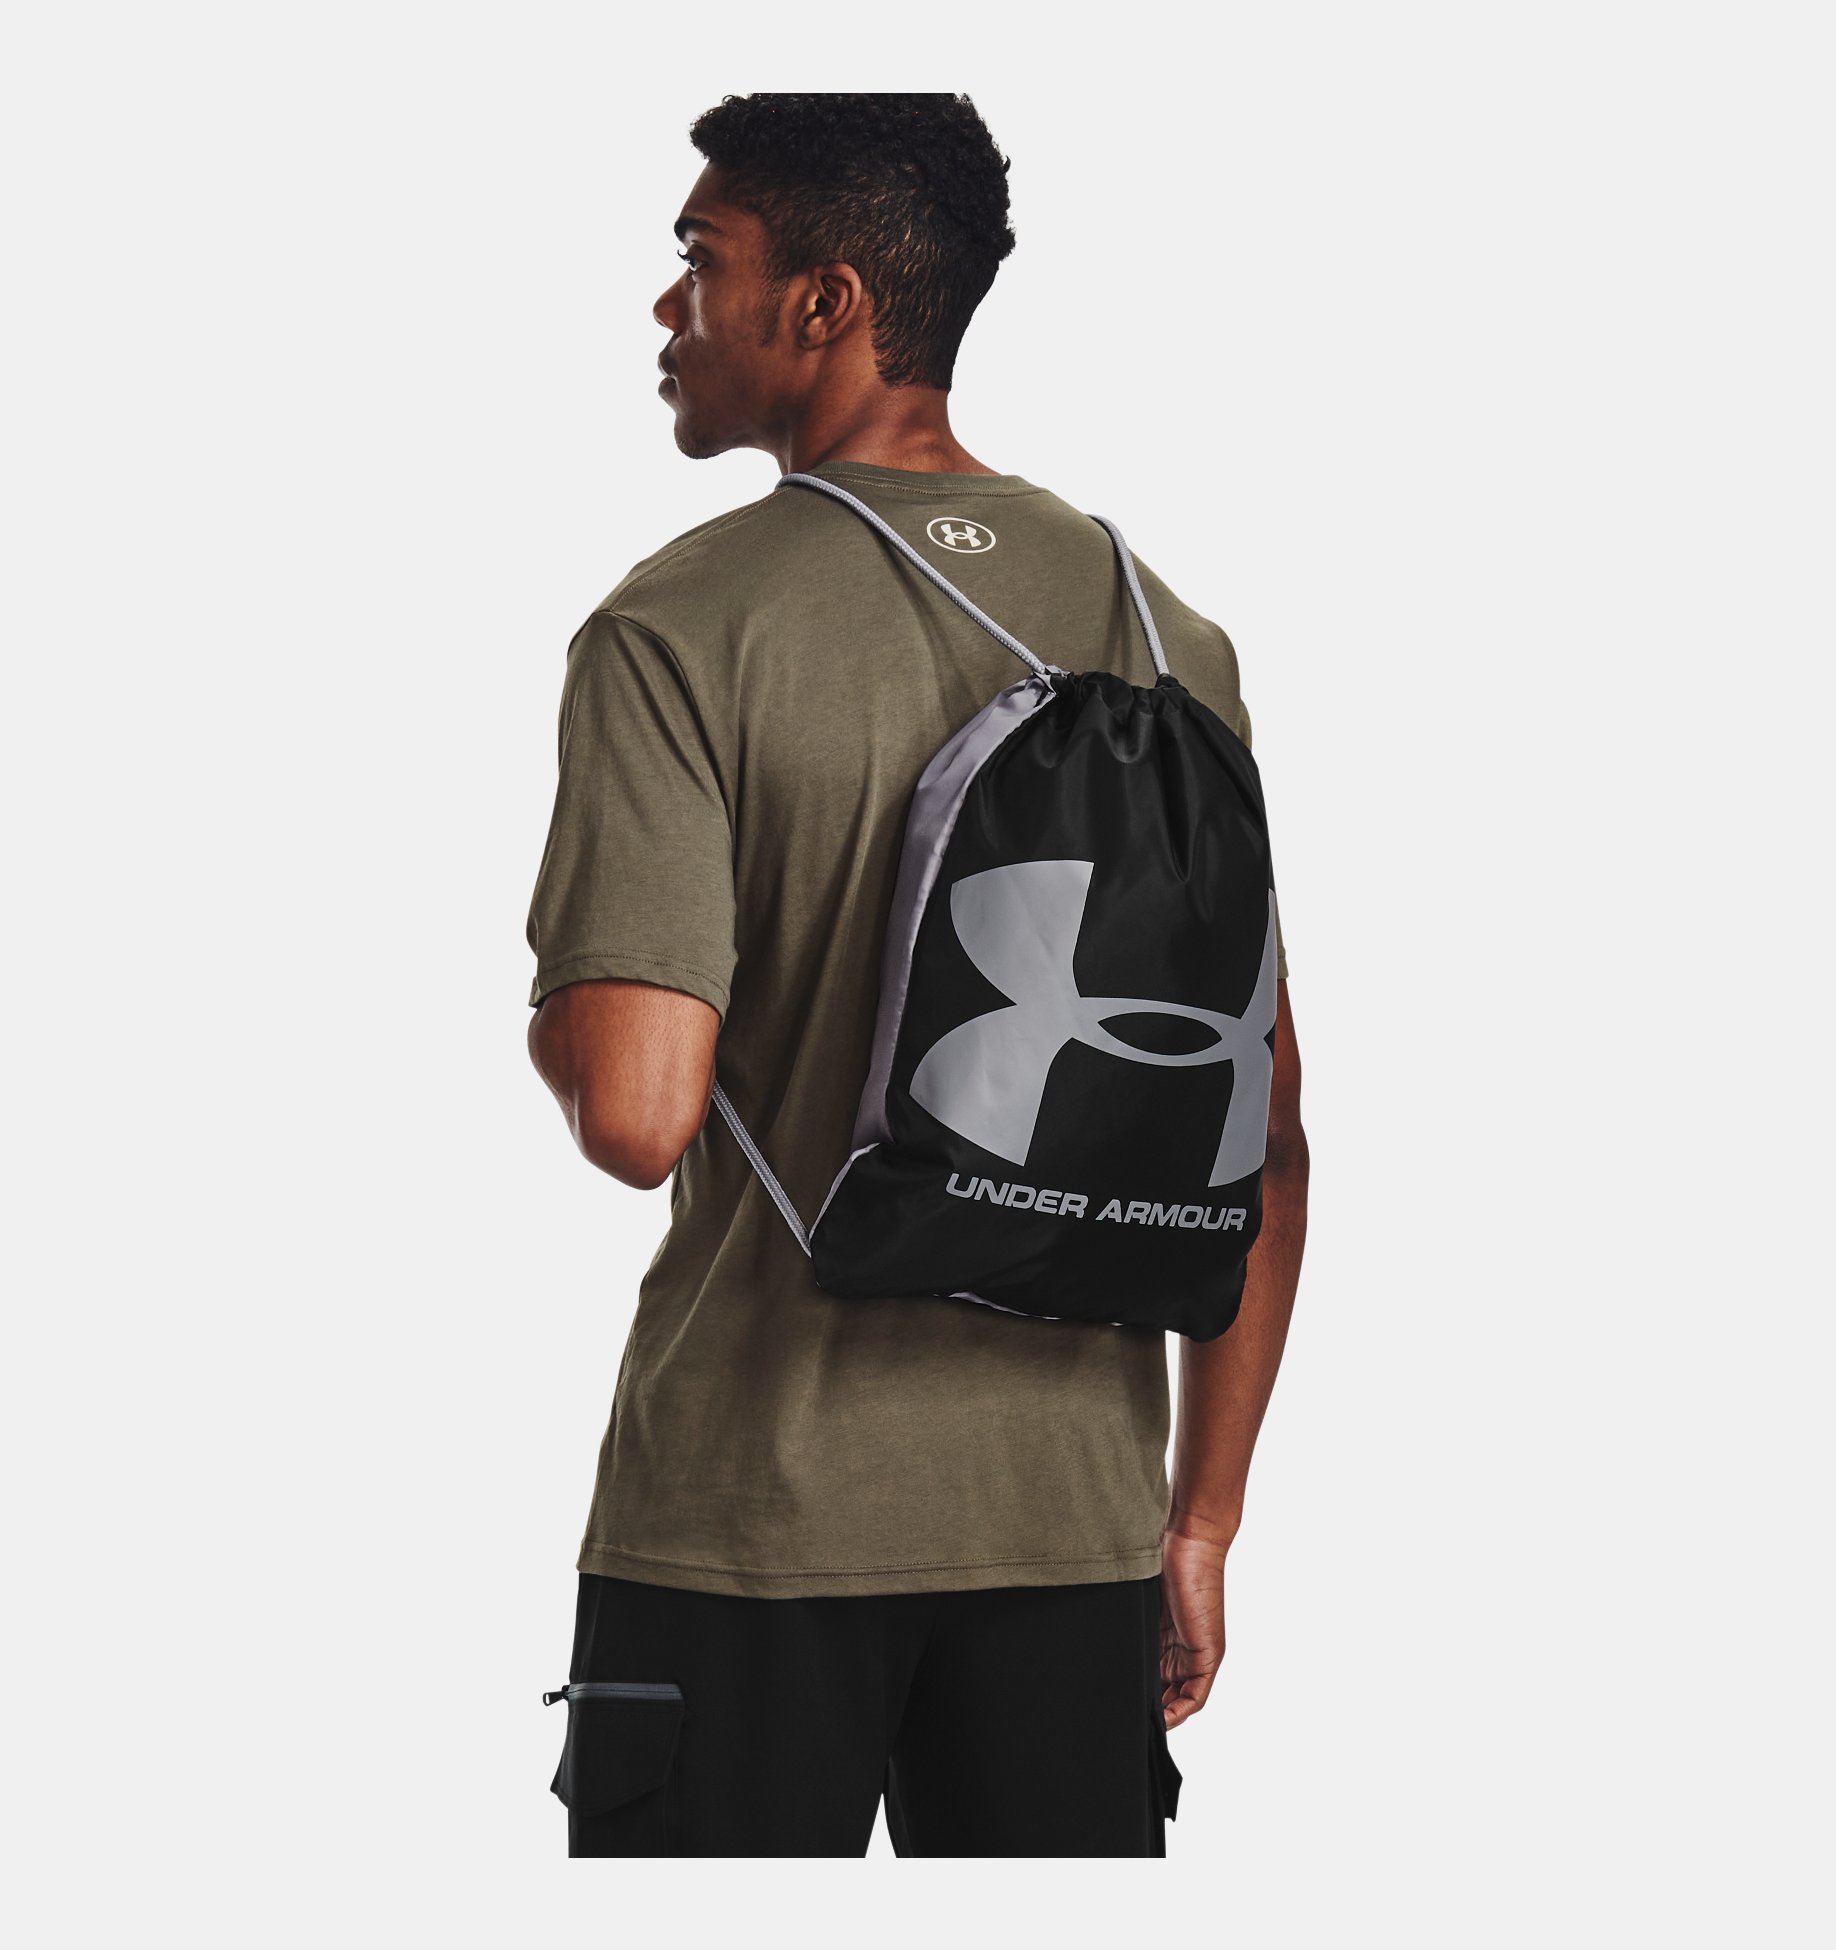 Under Armour Unisex-Adult Ozsee Sackpack 